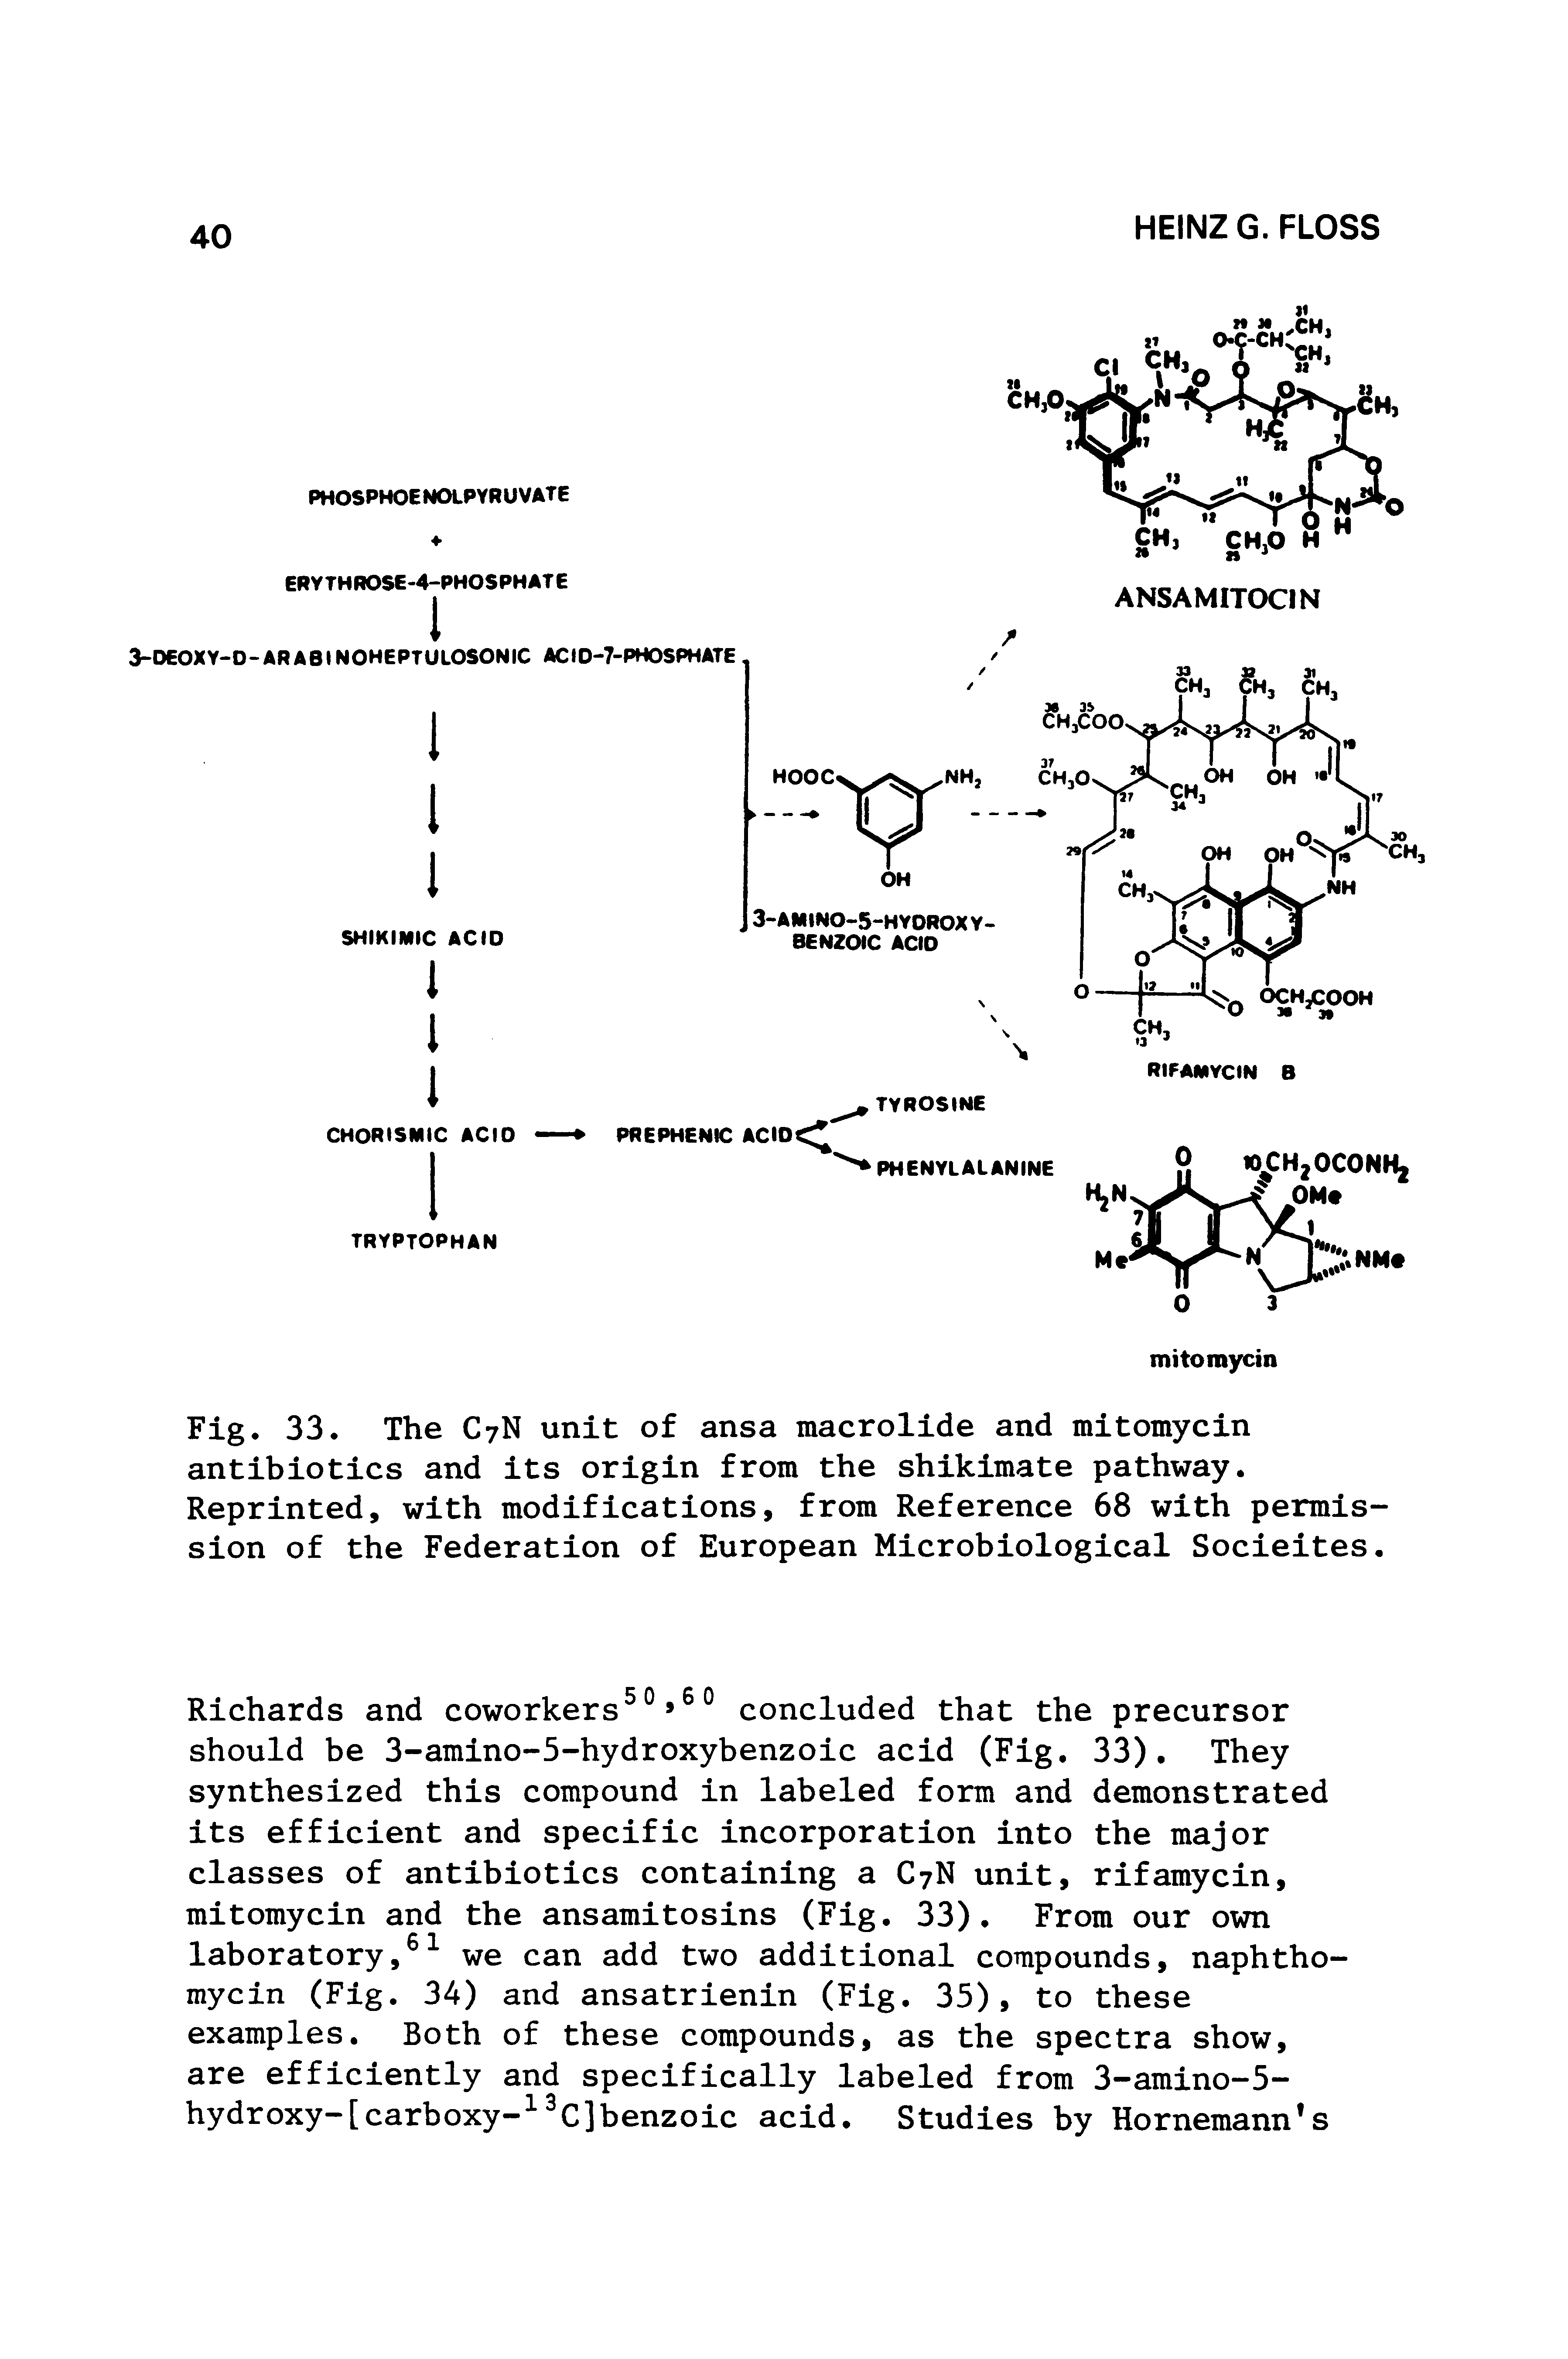 Fig. 33. The C7N unit of ansa macrolide and mitomycin antibiotics and its origin from the shikimate pathway. Reprinted, with modifications, from Reference 68 with permission of the Federation of European Microbiological Socieites.